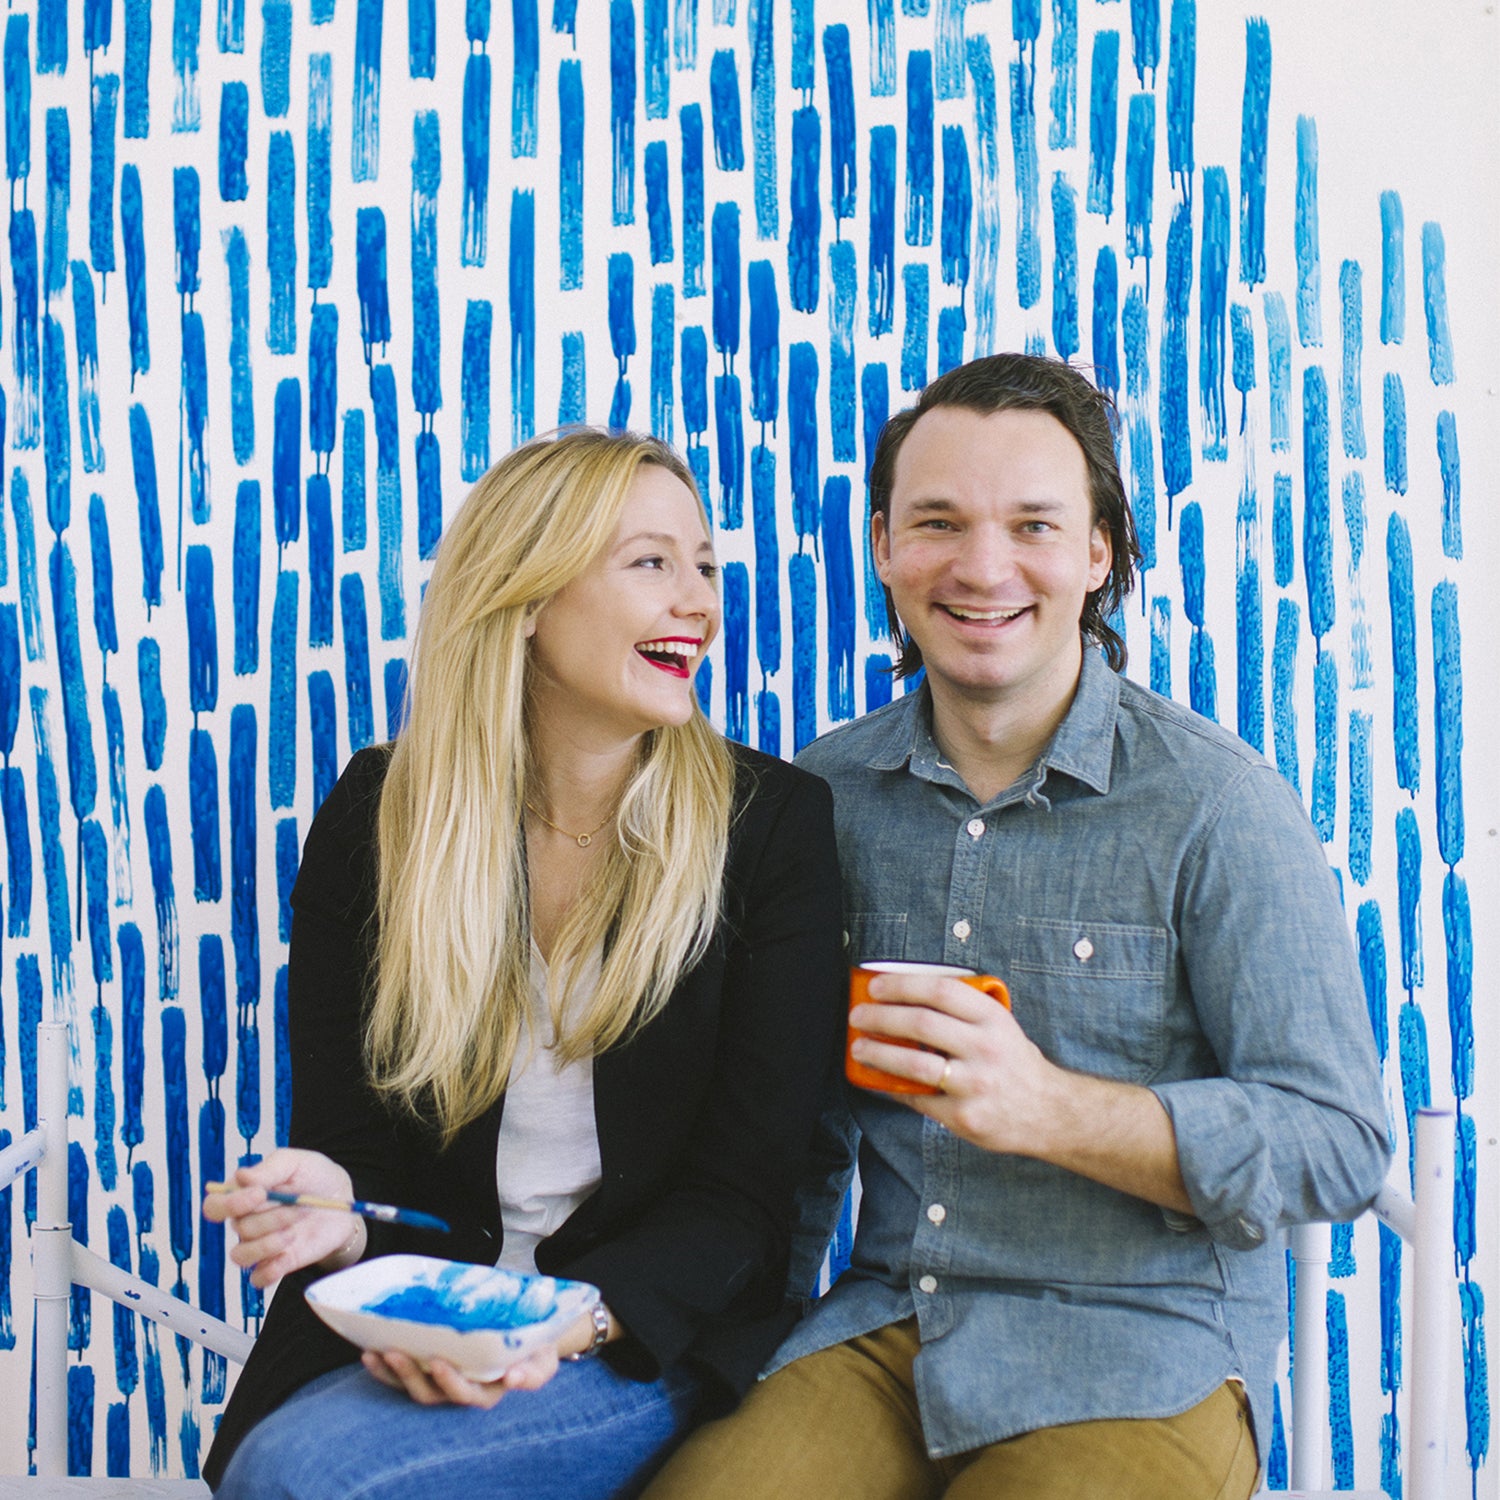 A man and woman sit smiling and holding a paint brush and a coffee mug, in front of a white wall covered in bold blue paint strokes.